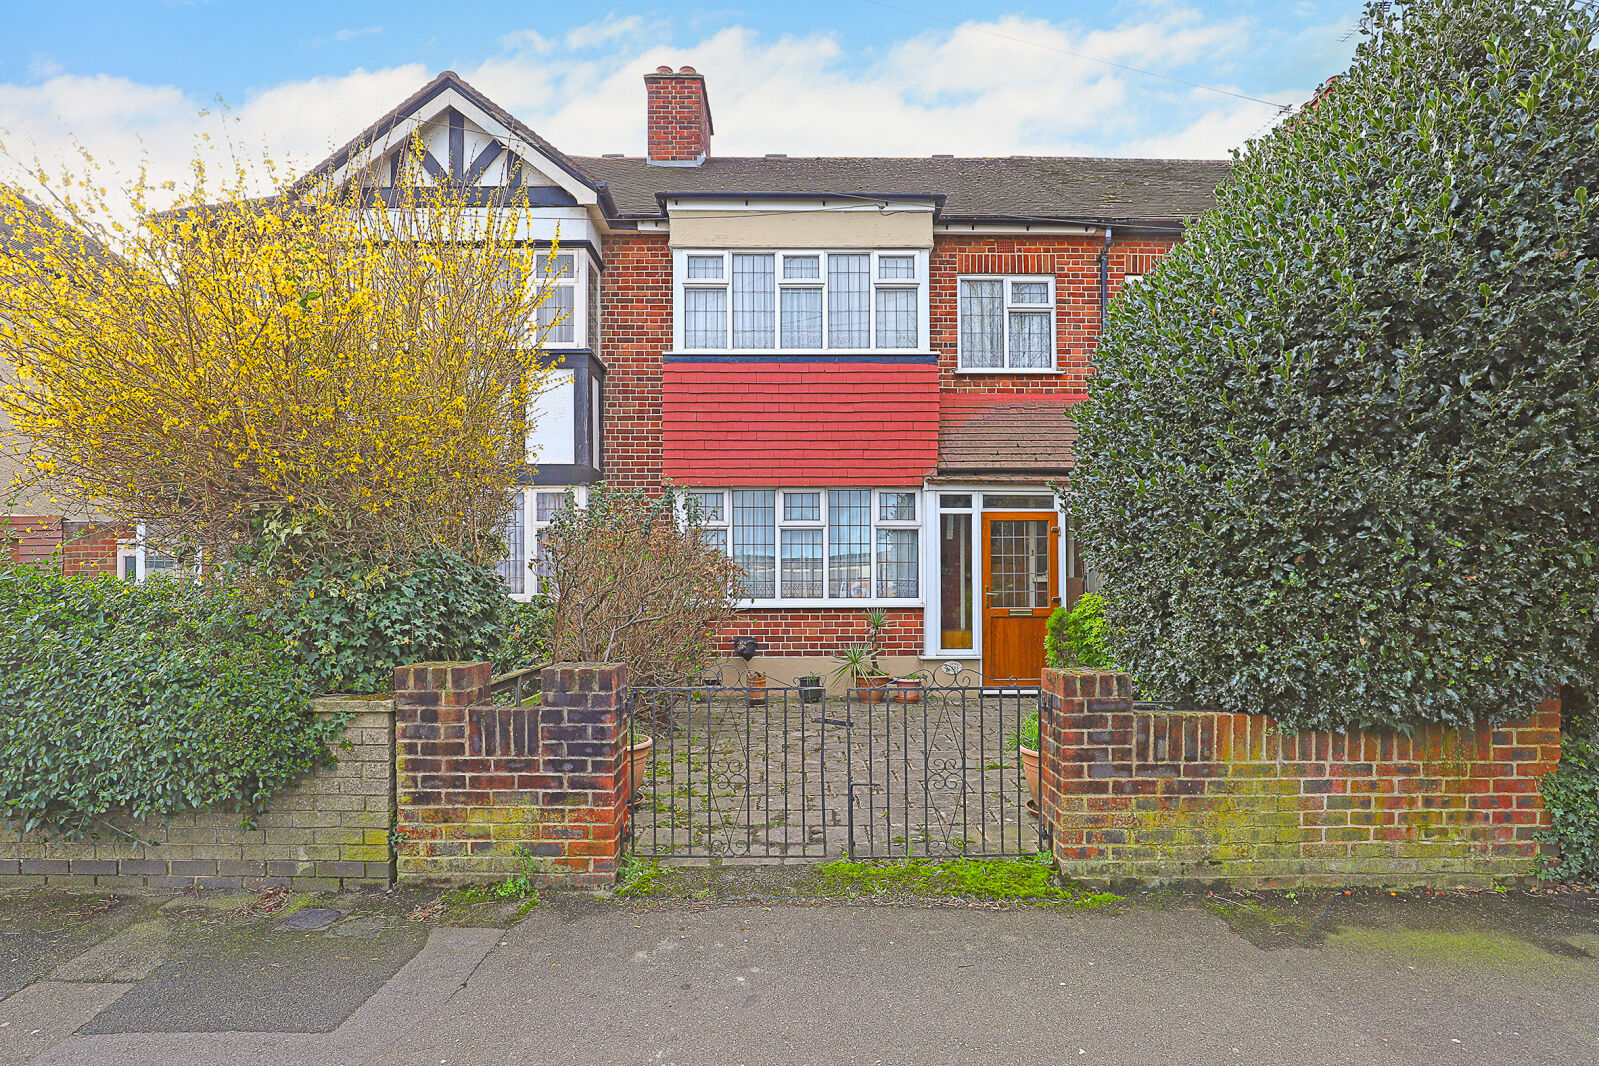 3 bedroom mid terraced house for sale Snakes Lane East, Woodford Green, IG8, main image